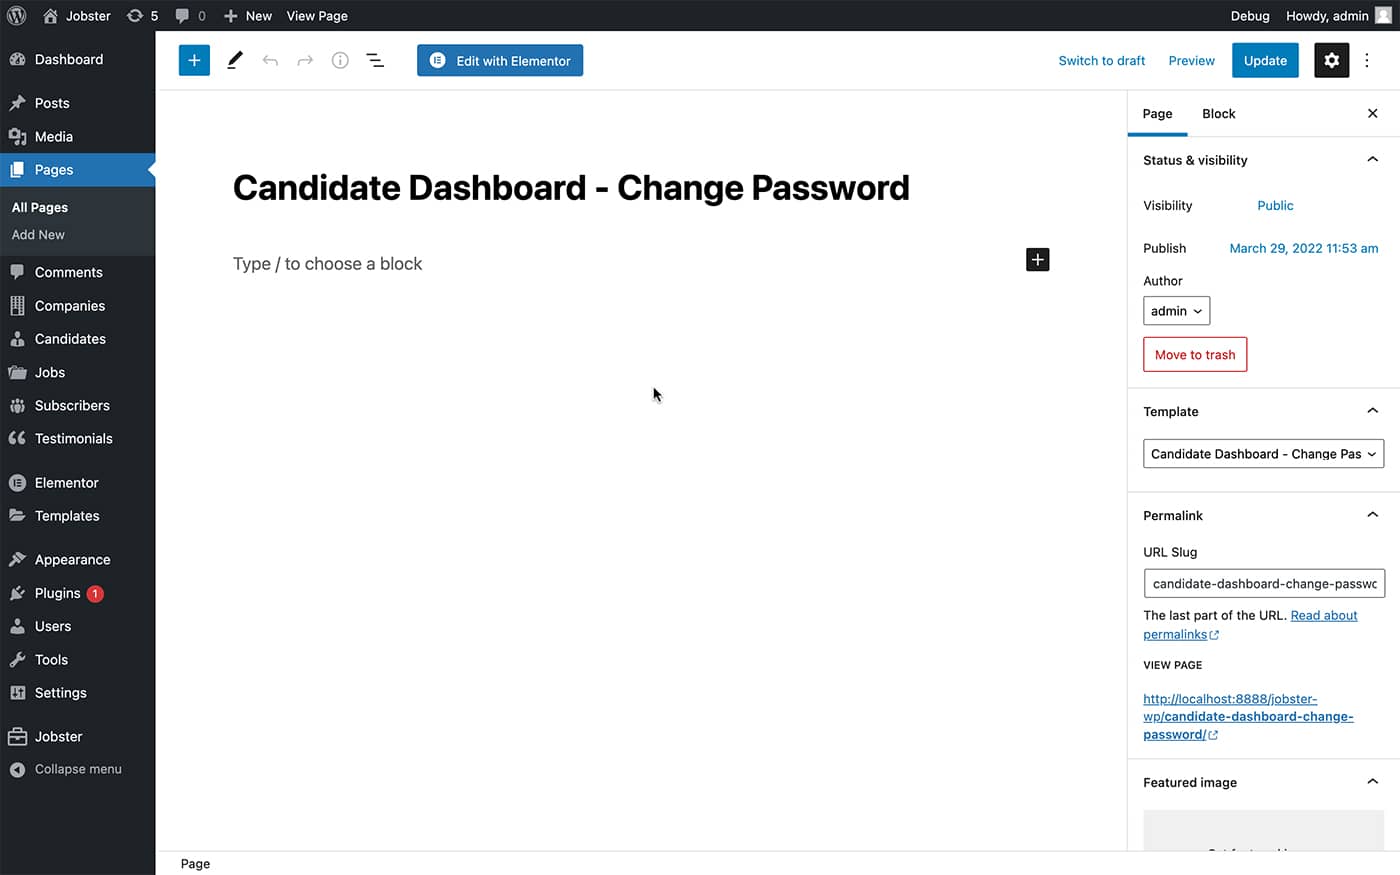 Jobster candidate dashboard change password page template